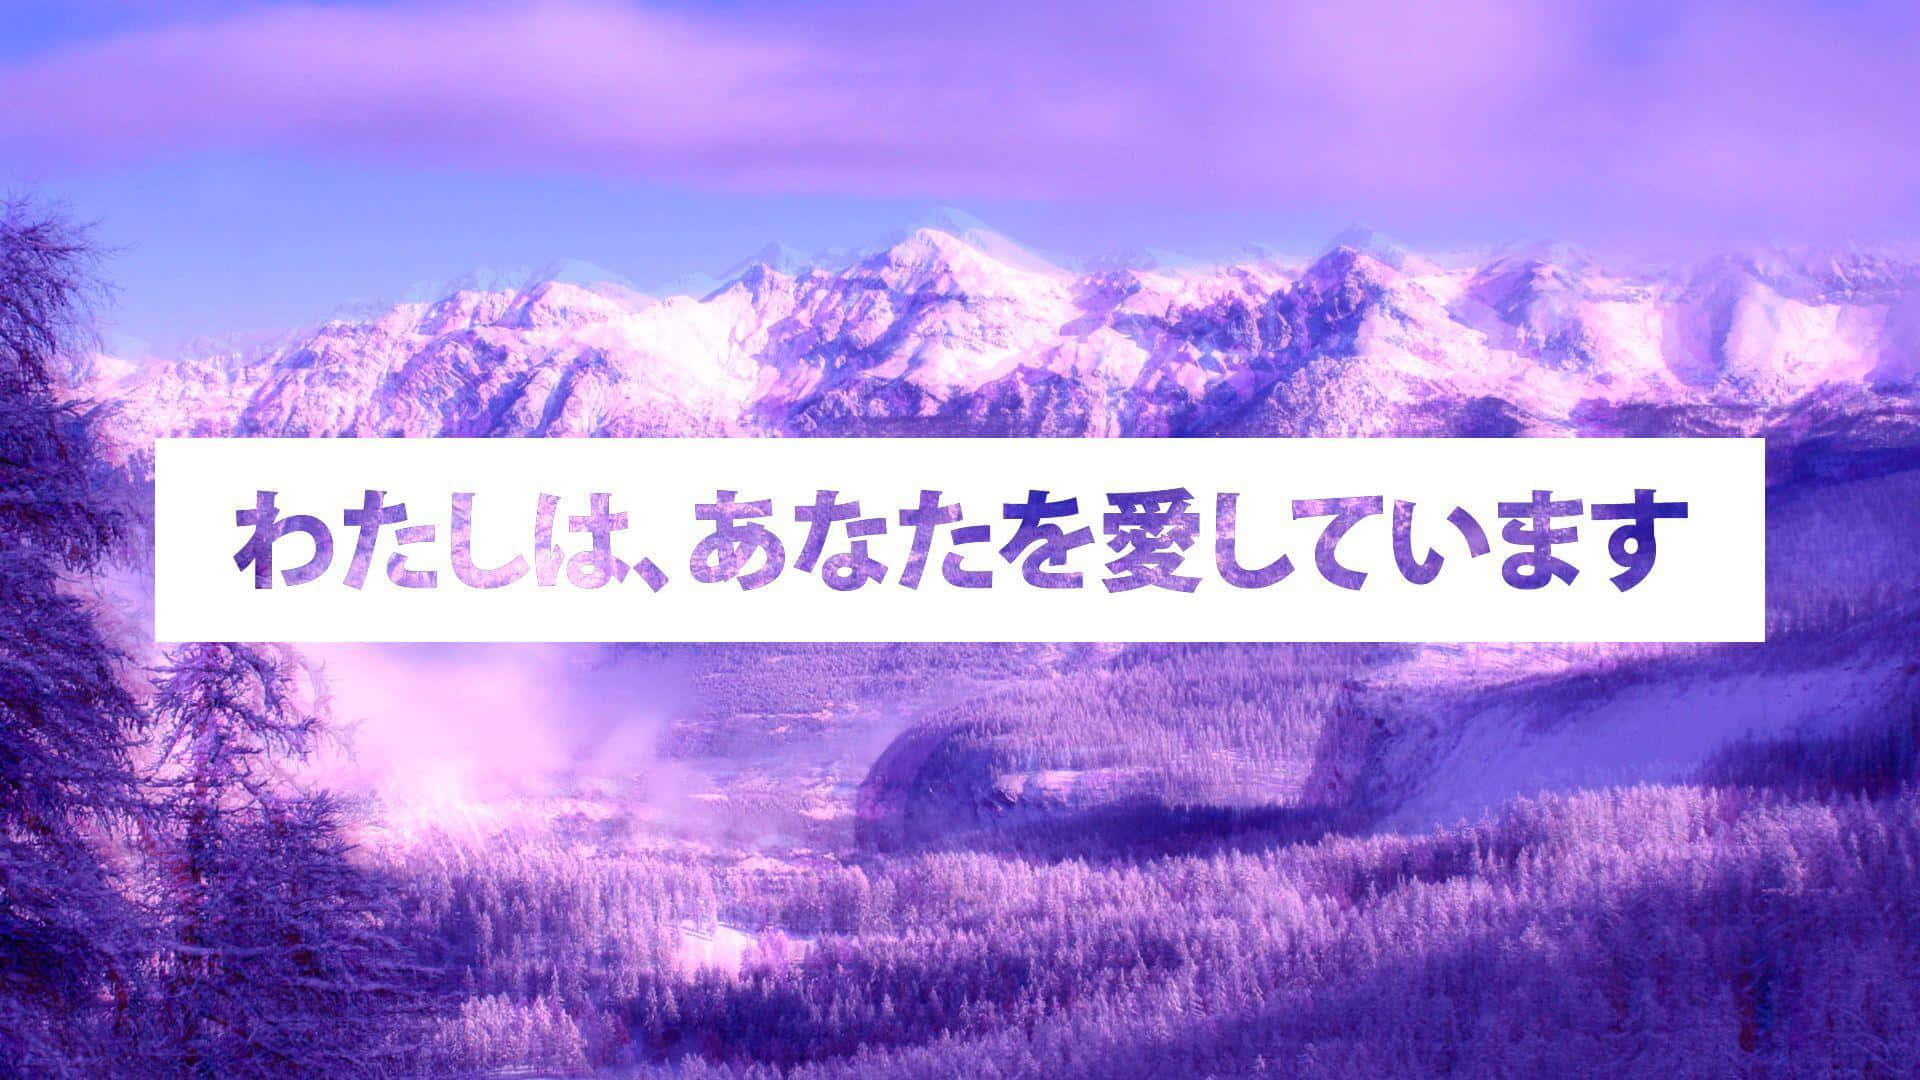 Japanese Mountain Aestheticwith Text Wallpaper